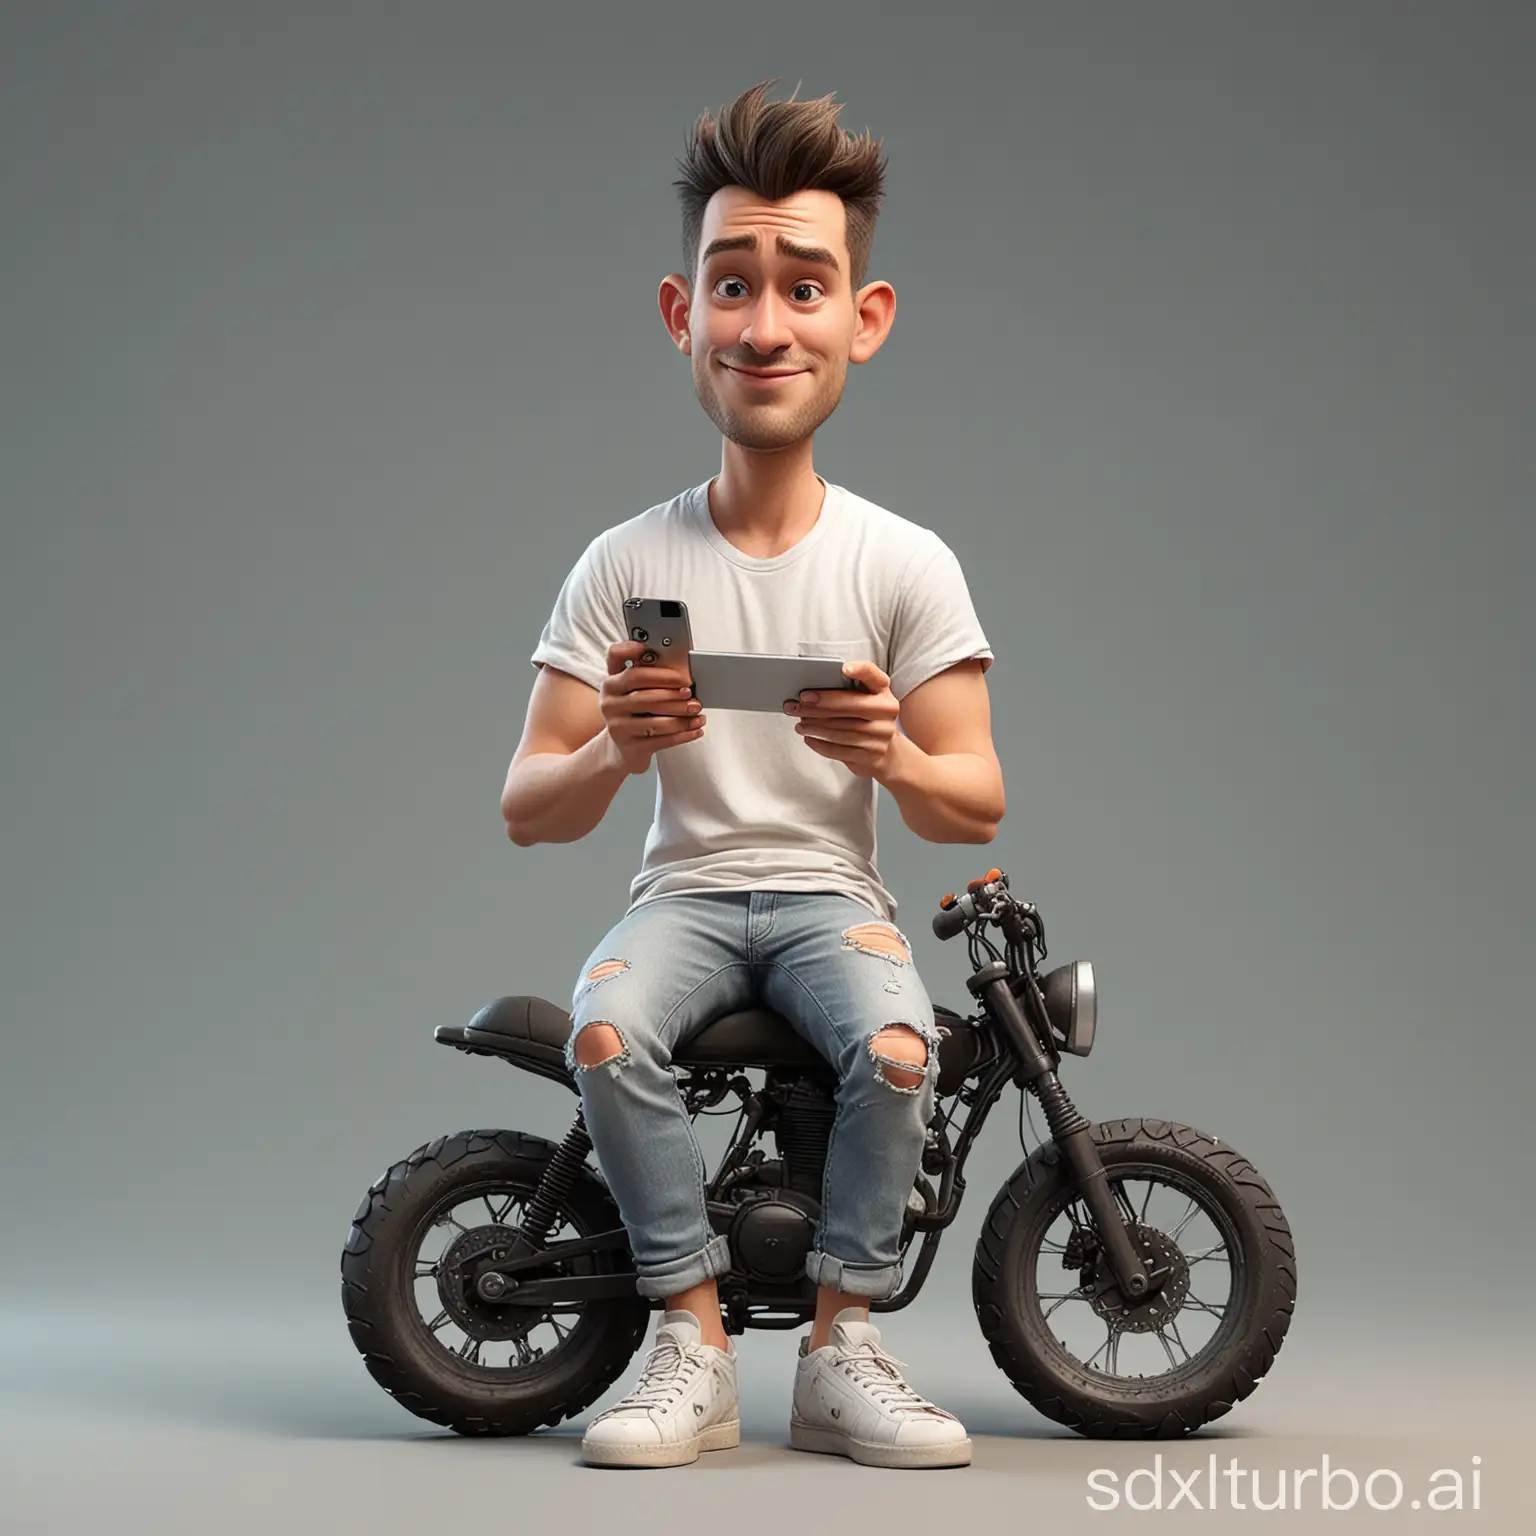 create a realistic 3D caricature Disney pixar style full body with a big head. 35 year old man, was sitting on a motorbike while playing on his cellphone. Wearing a white t-shirt covered with a cream colored shirt. wearing worn and torn gray jeans. Wearing white sneakers with black socks. Sit with your legs apart, right hand plucking the strings, left hand pressing the scales. The background is workshop and contrast. improves the overall composition of the image. Use soft photographic lighting, dramatic overhead lighting, very high image quality, clear character details, UHD, 16k